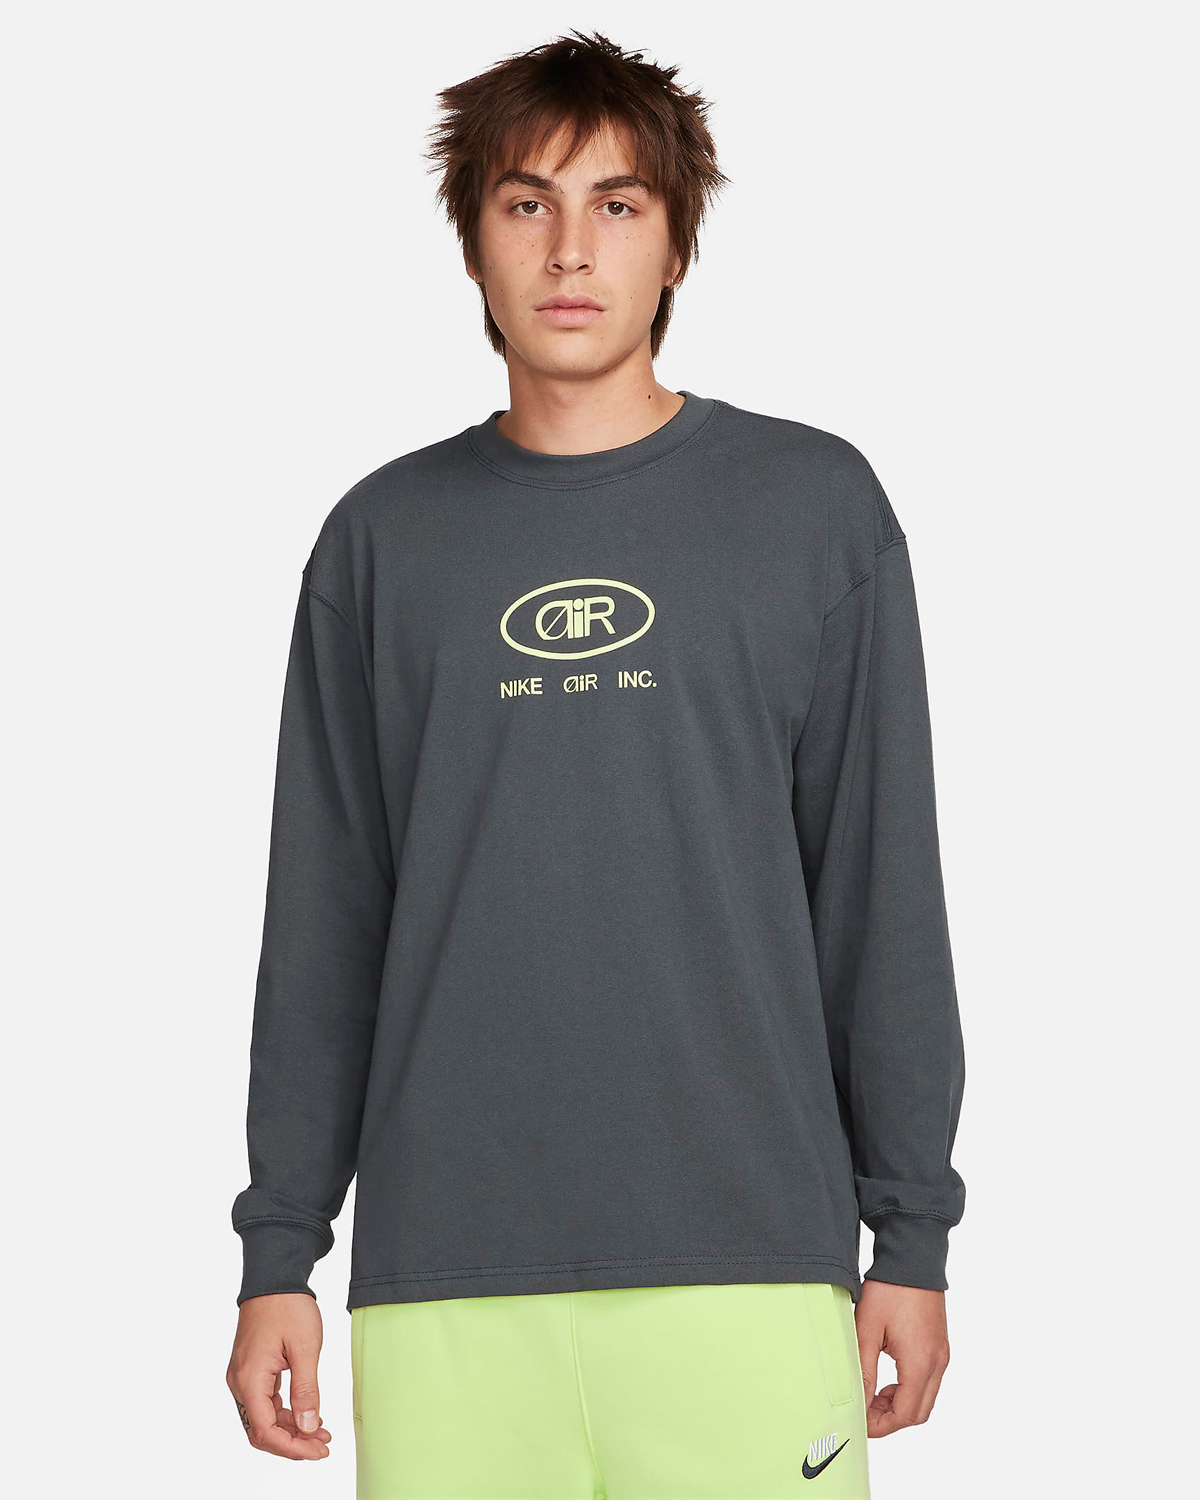 Nike-Sportswear-Max90-Long-Sleeve-T-Shirt-Anthracite-Volt-1